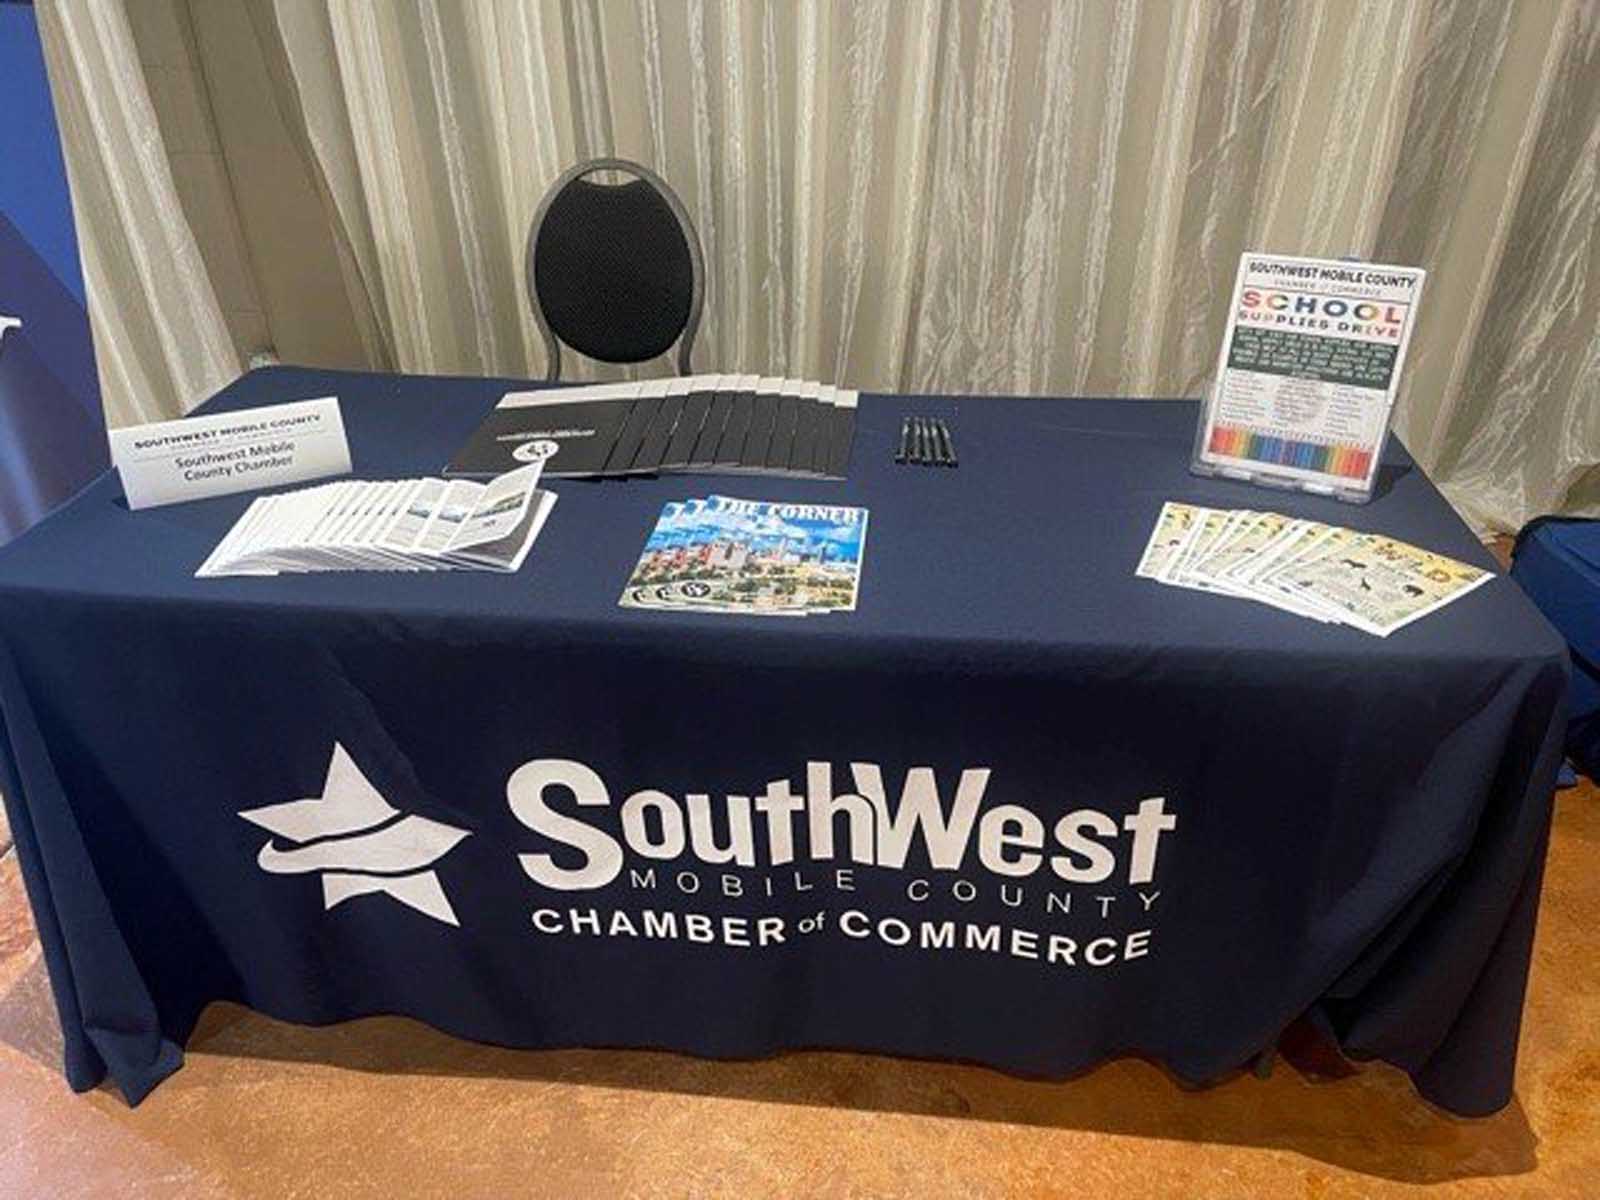 Southwest Mobile County Chamber Expo Announced